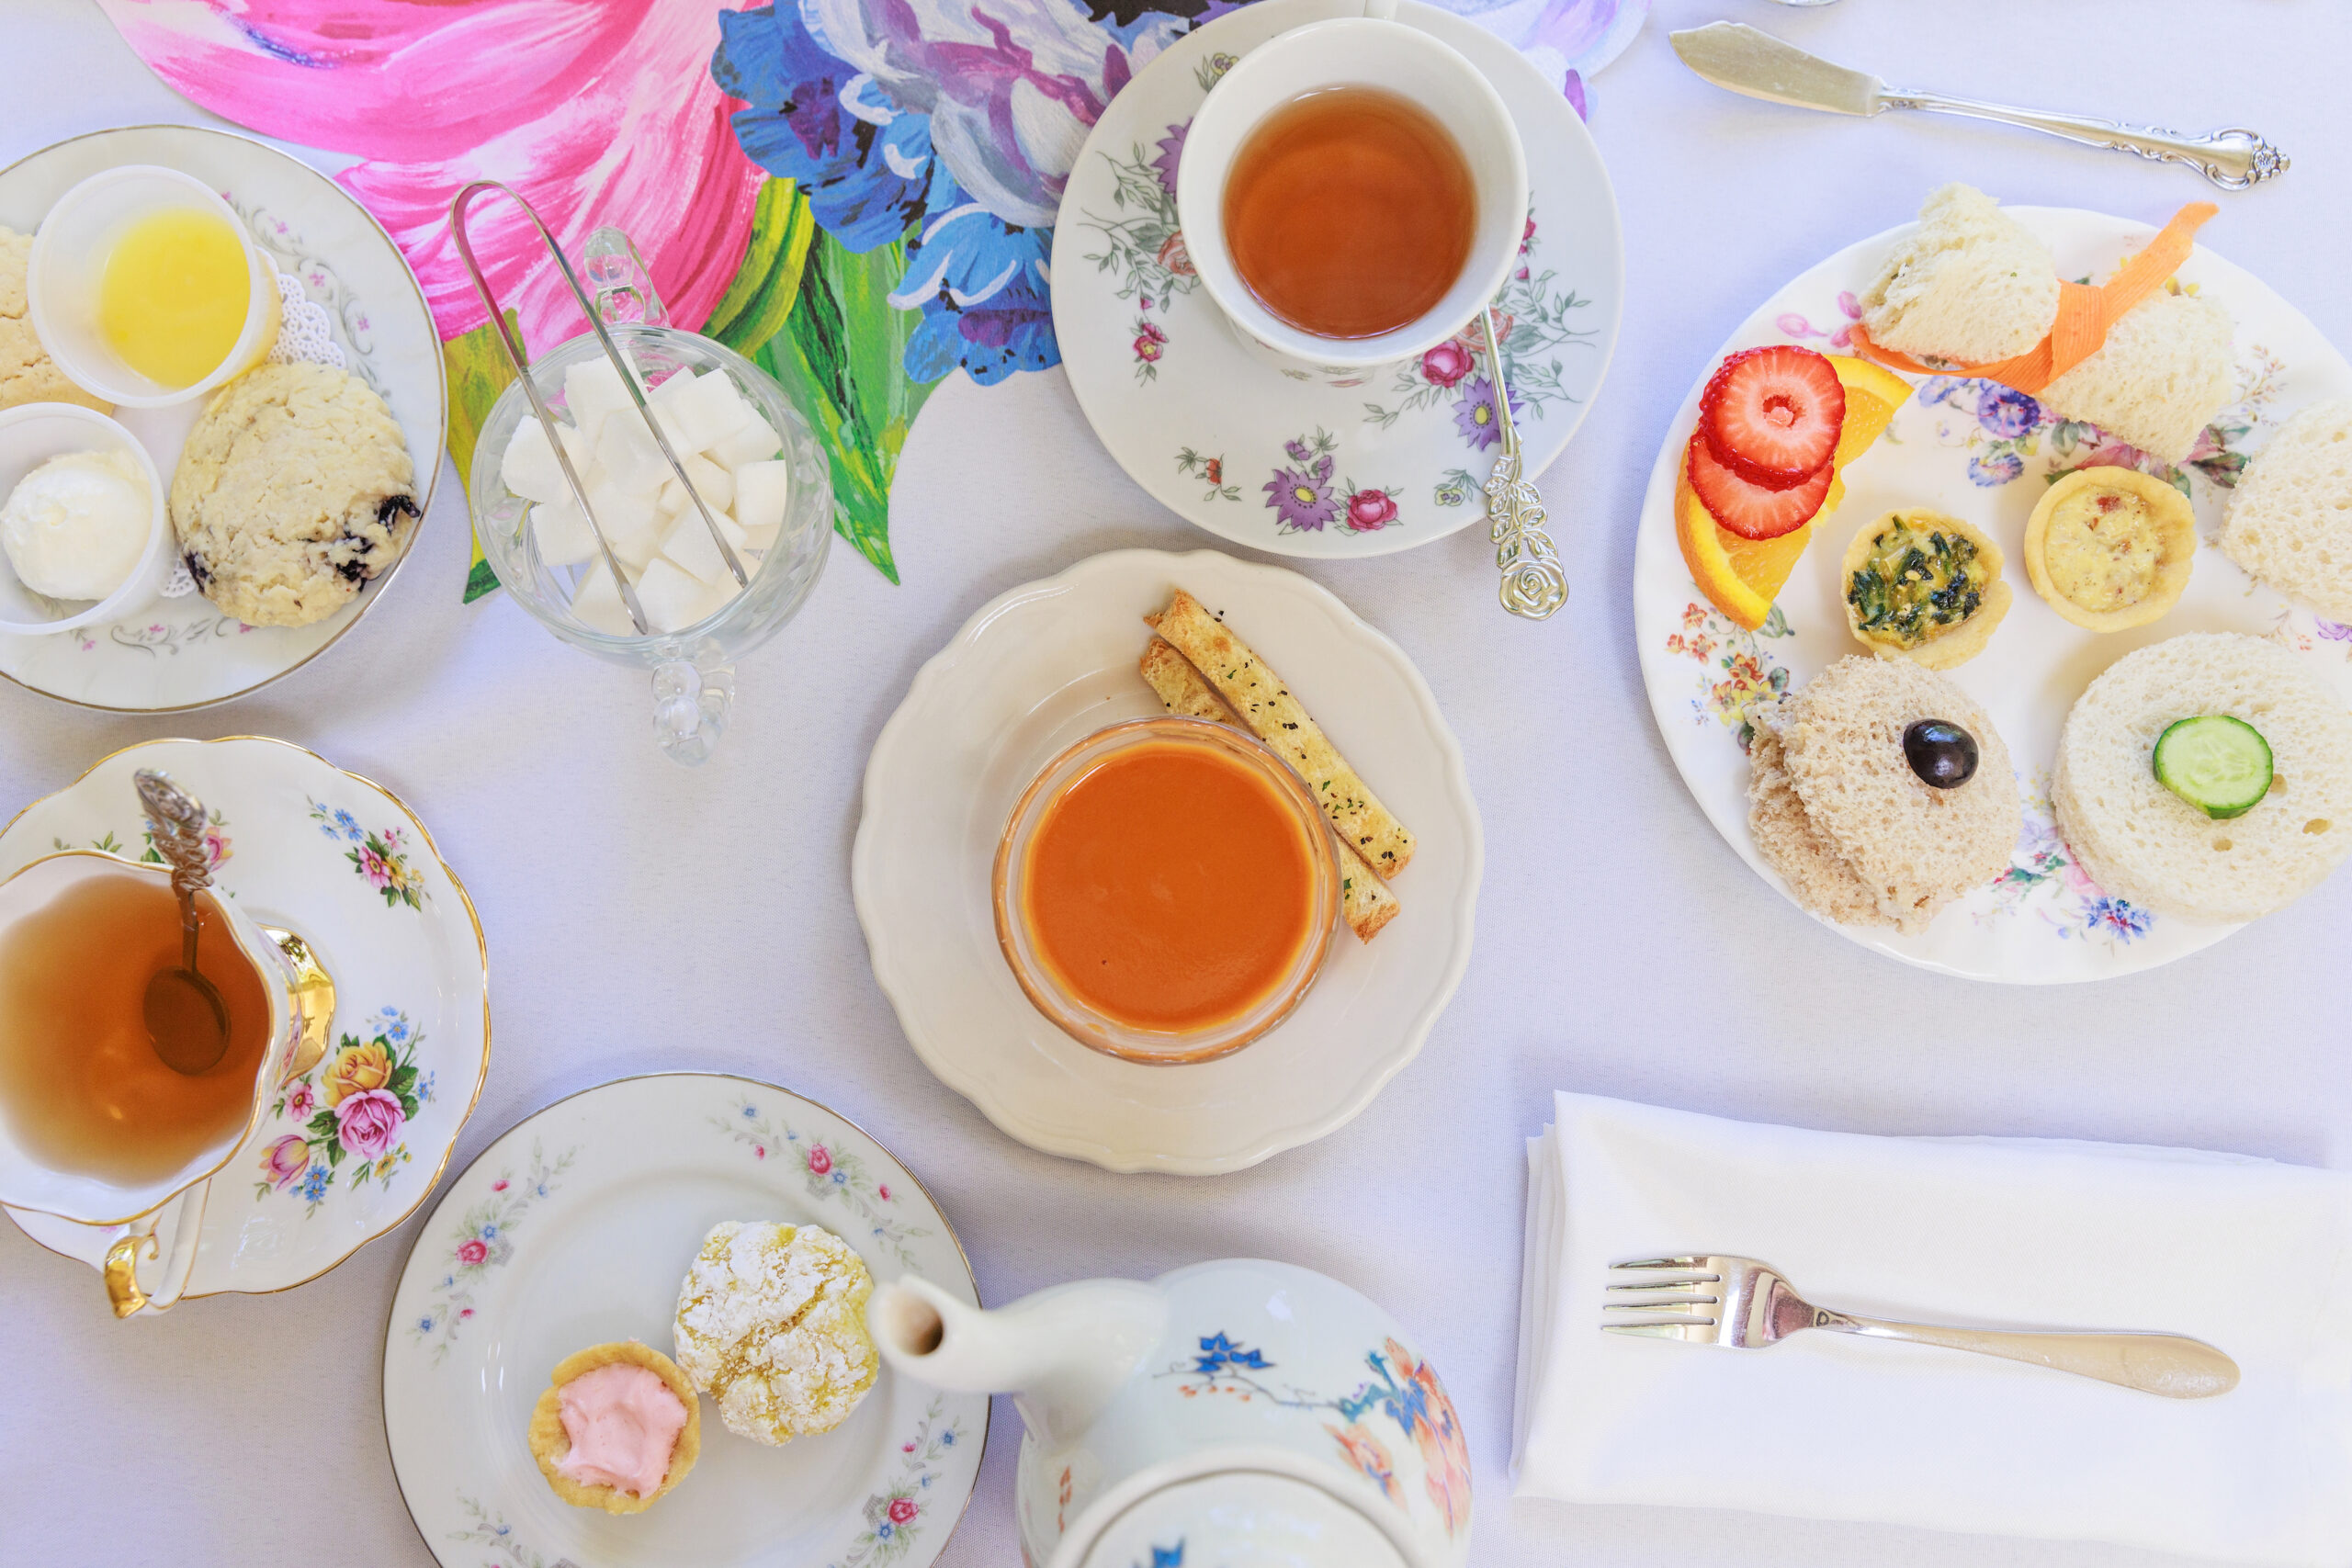 The Capital Region's tea rooms are brewing up charm and creativity